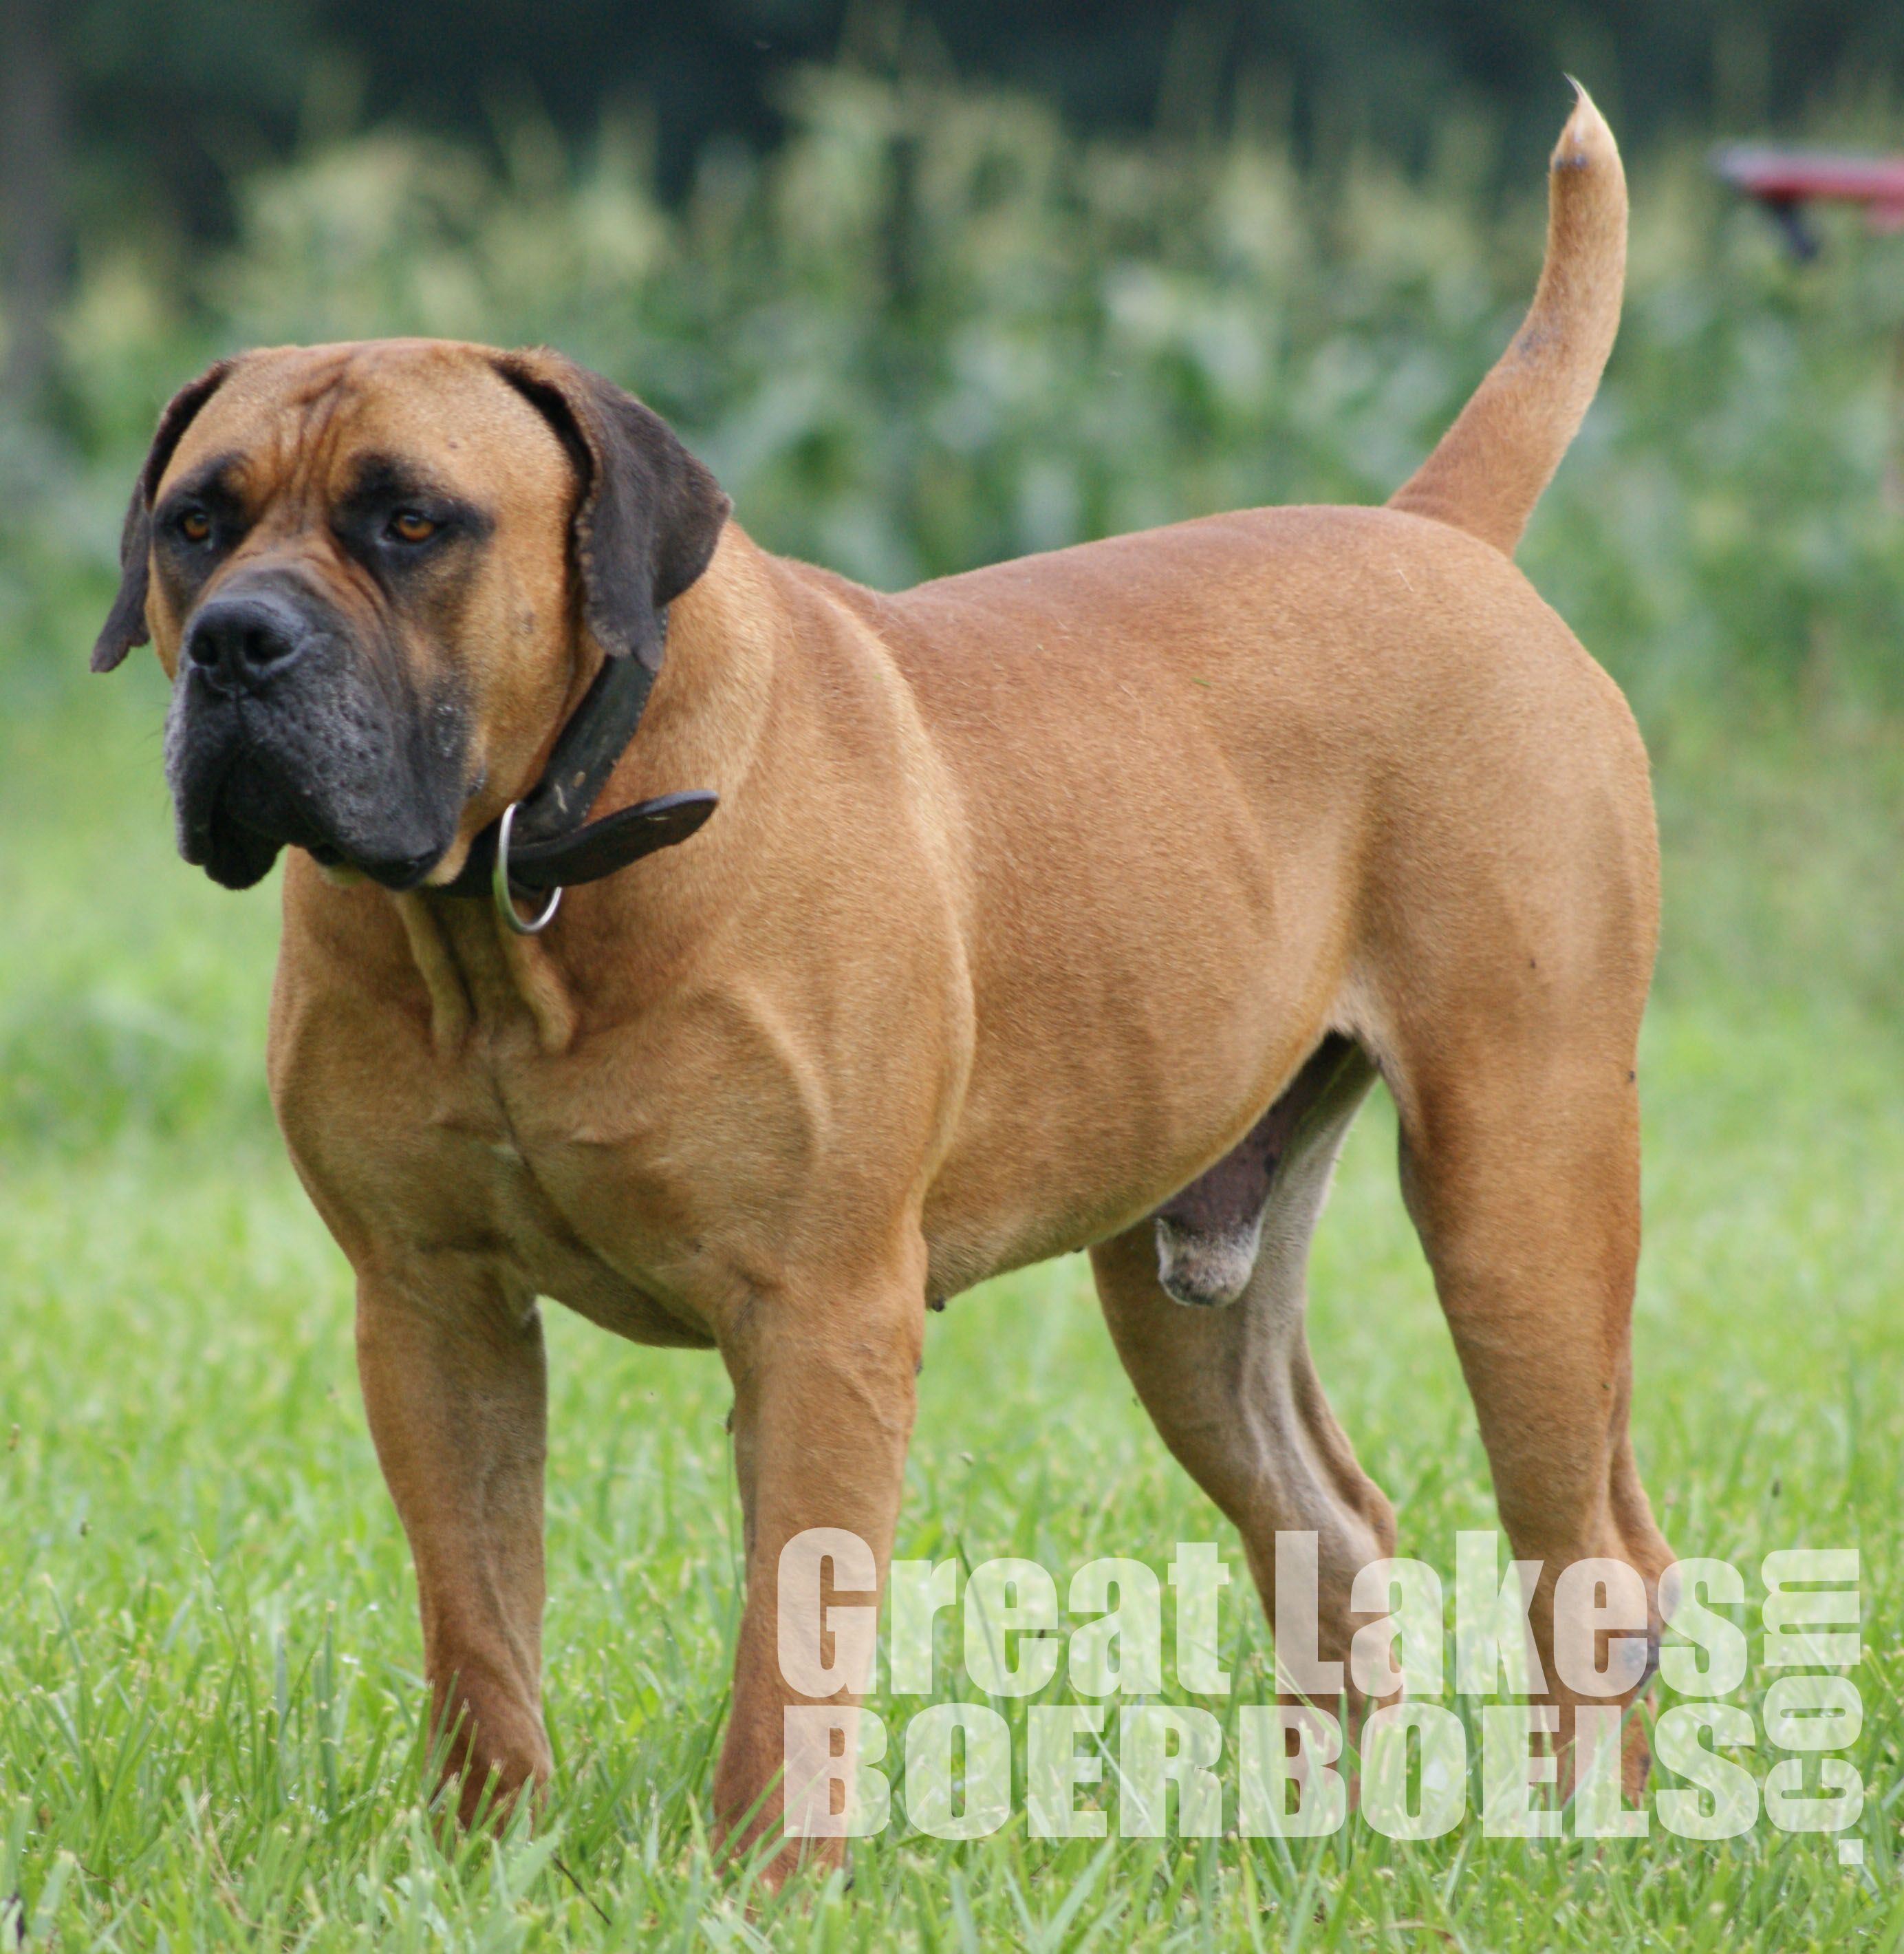 The Boerboel, or South African Mastiff, was bred specifically